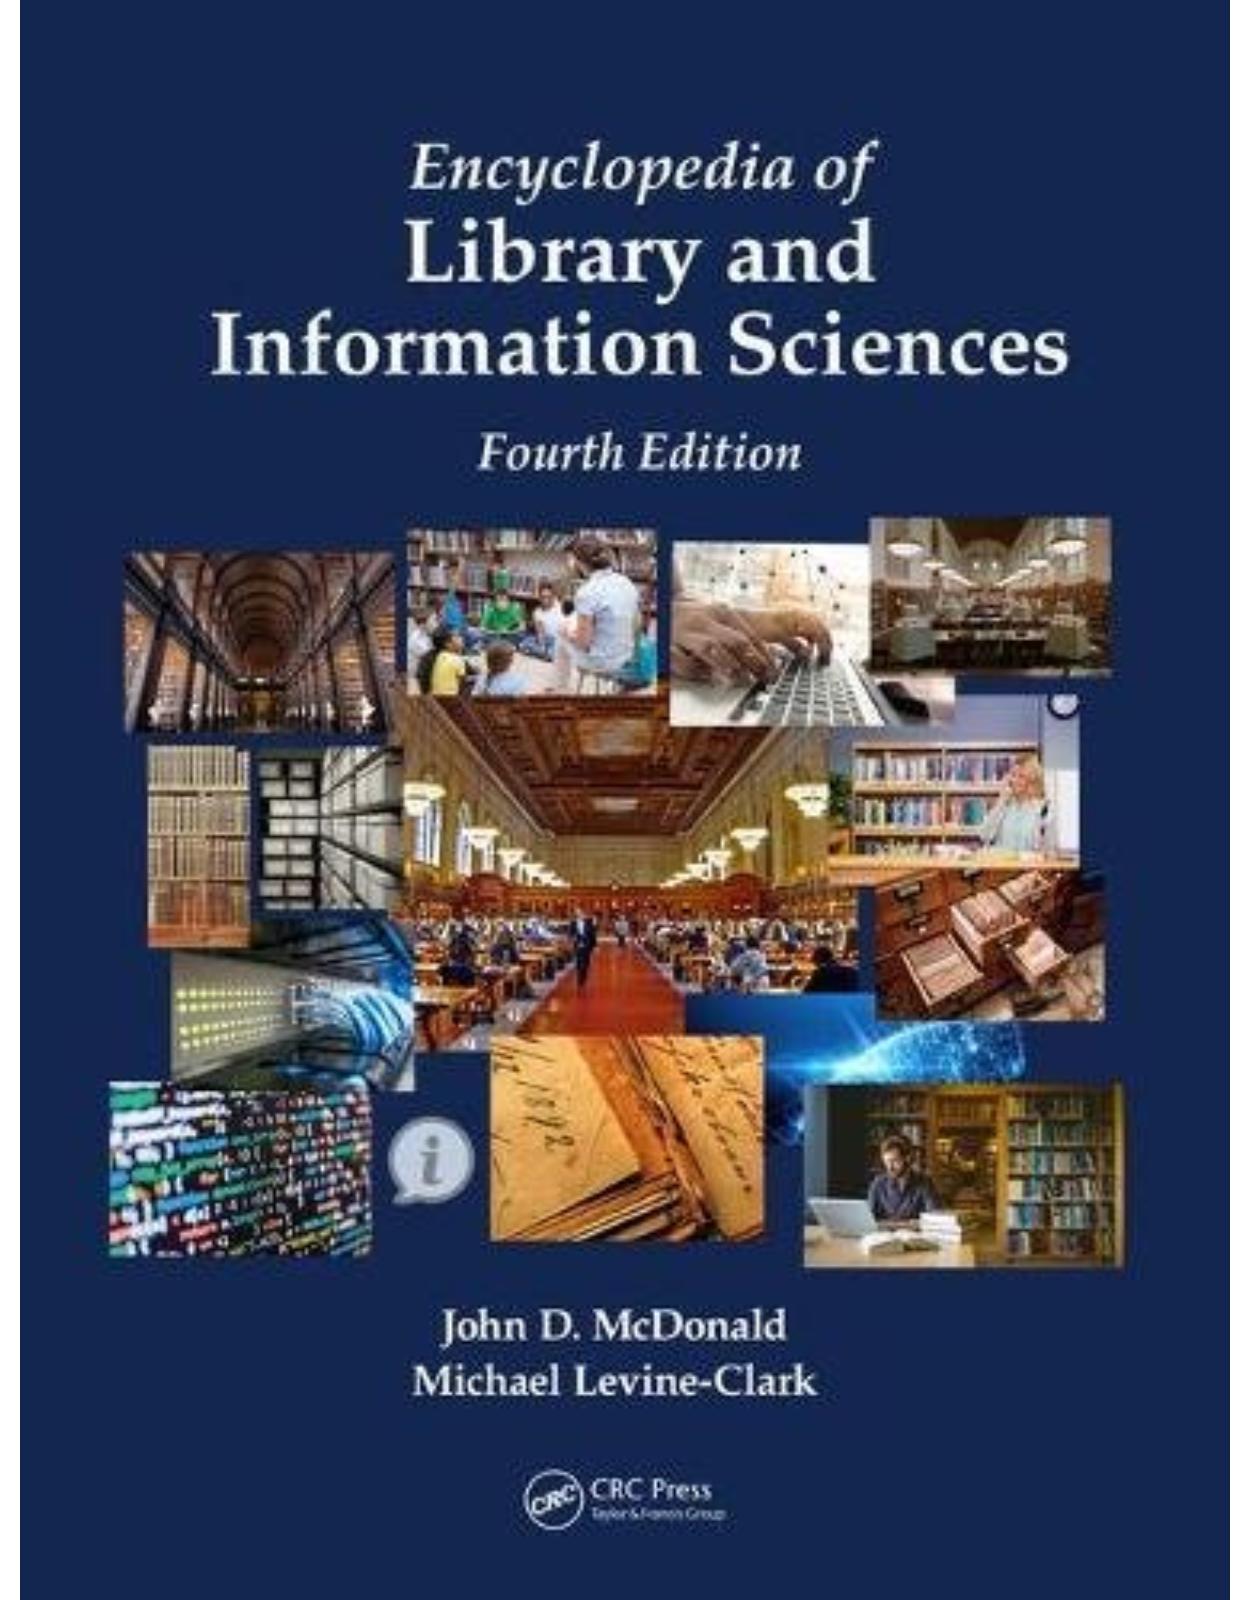 Encyclopedia of Library and Information Sciences, Fourth Edition